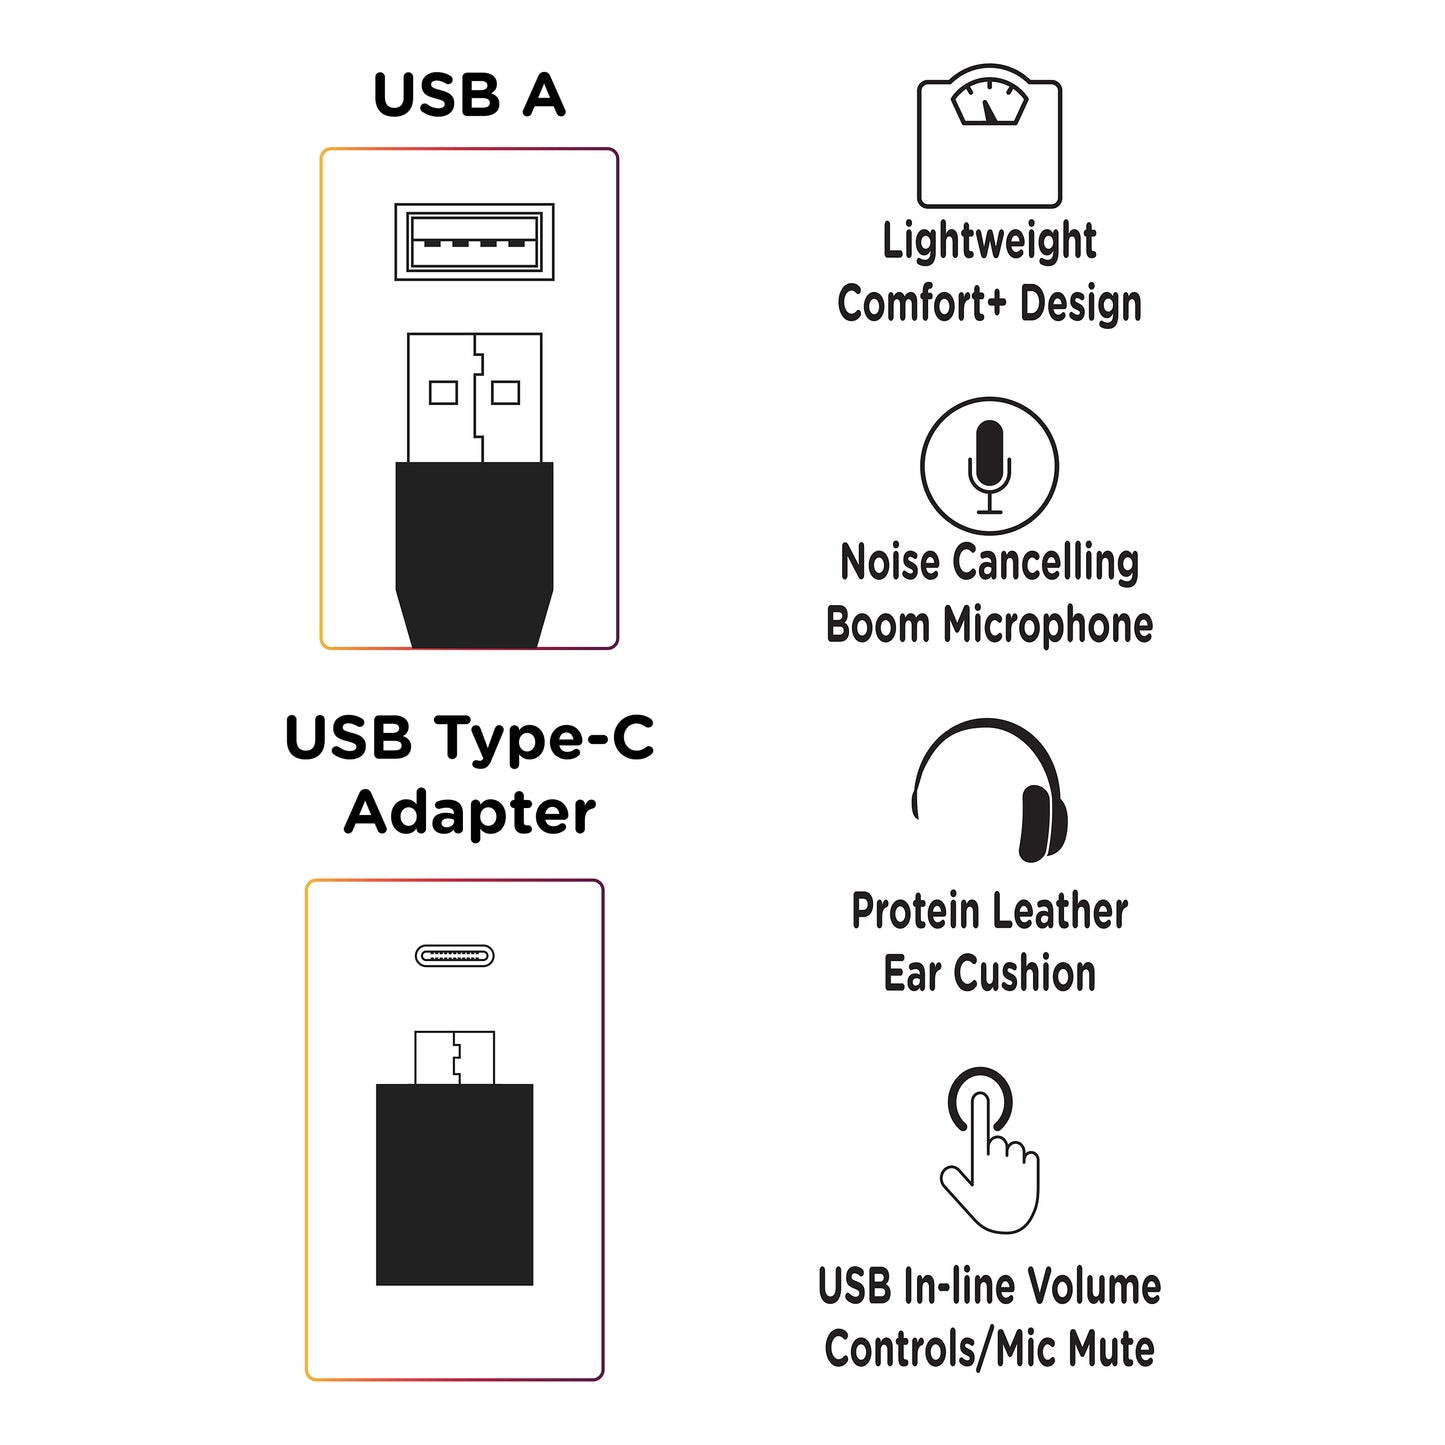 Icon image card depicting the features of the Connect USB Mono Headset: Features include Lightweight Design, Flexible Boom Microphone, Protein Leather Ear Cushion, Inline Volume Control and USB A connector to connect to a PC/Mac, Tablet or computer